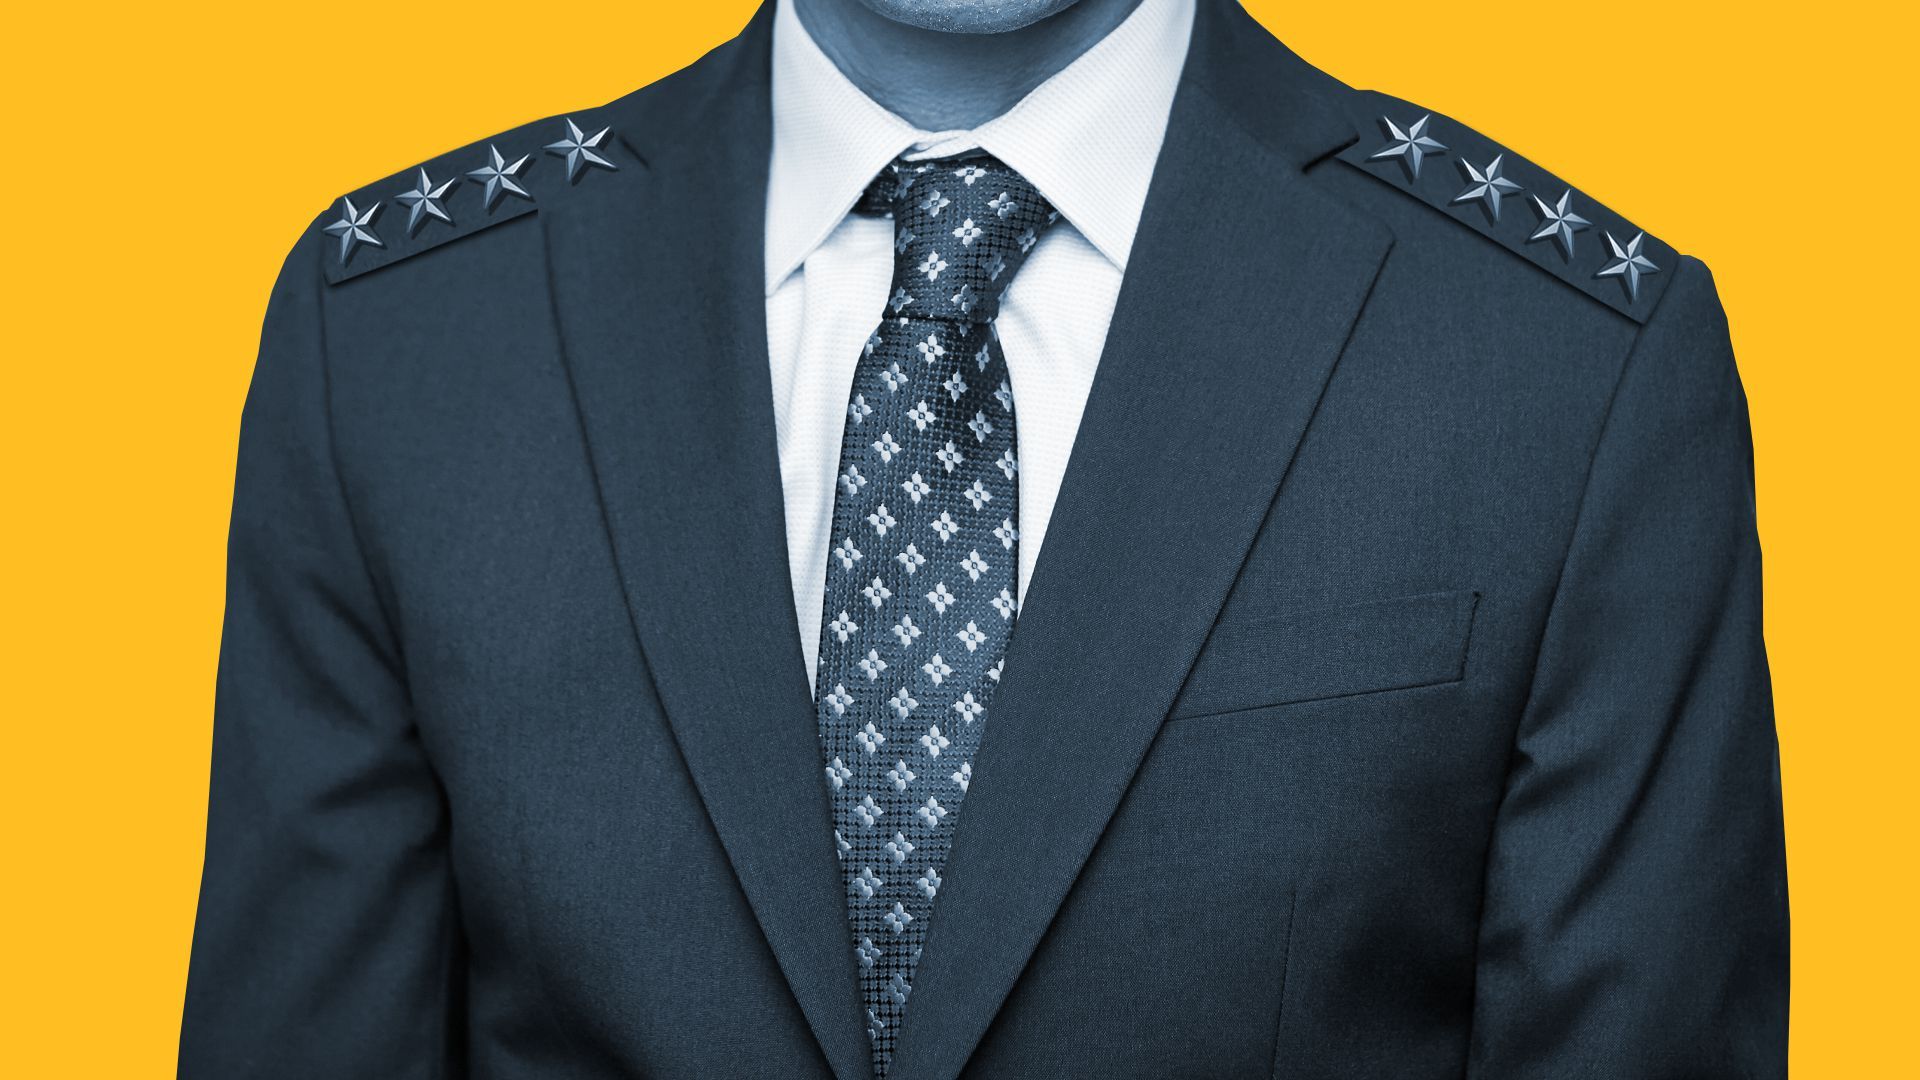 Illustration of a suited CEO with military stars on their shoulders